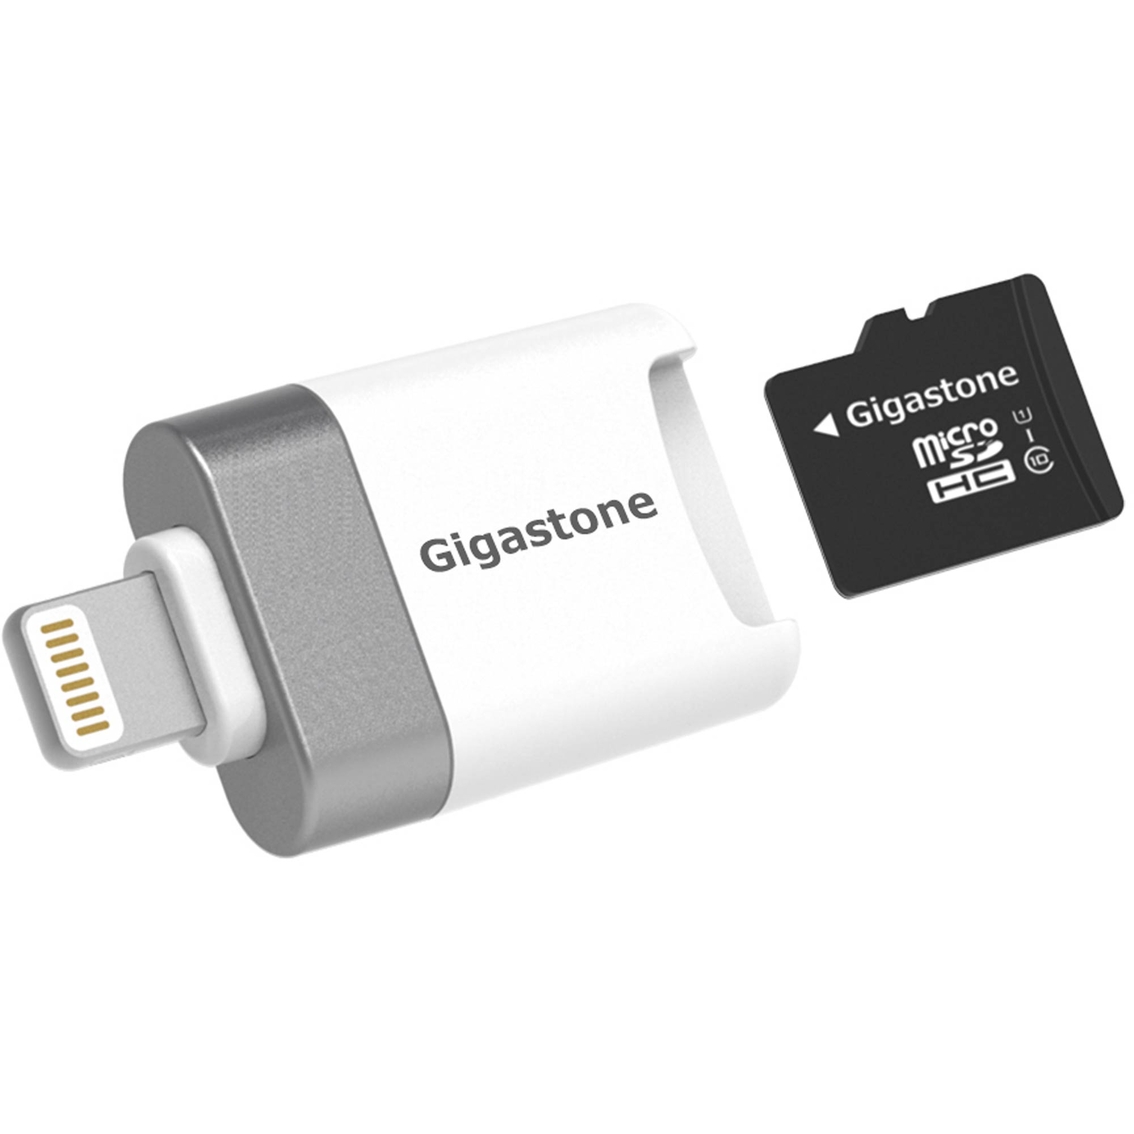 Gigastone Microsd Card Reader With Lightning Connector For Apple Iphone/ipad, Audio Accessories, Electronics